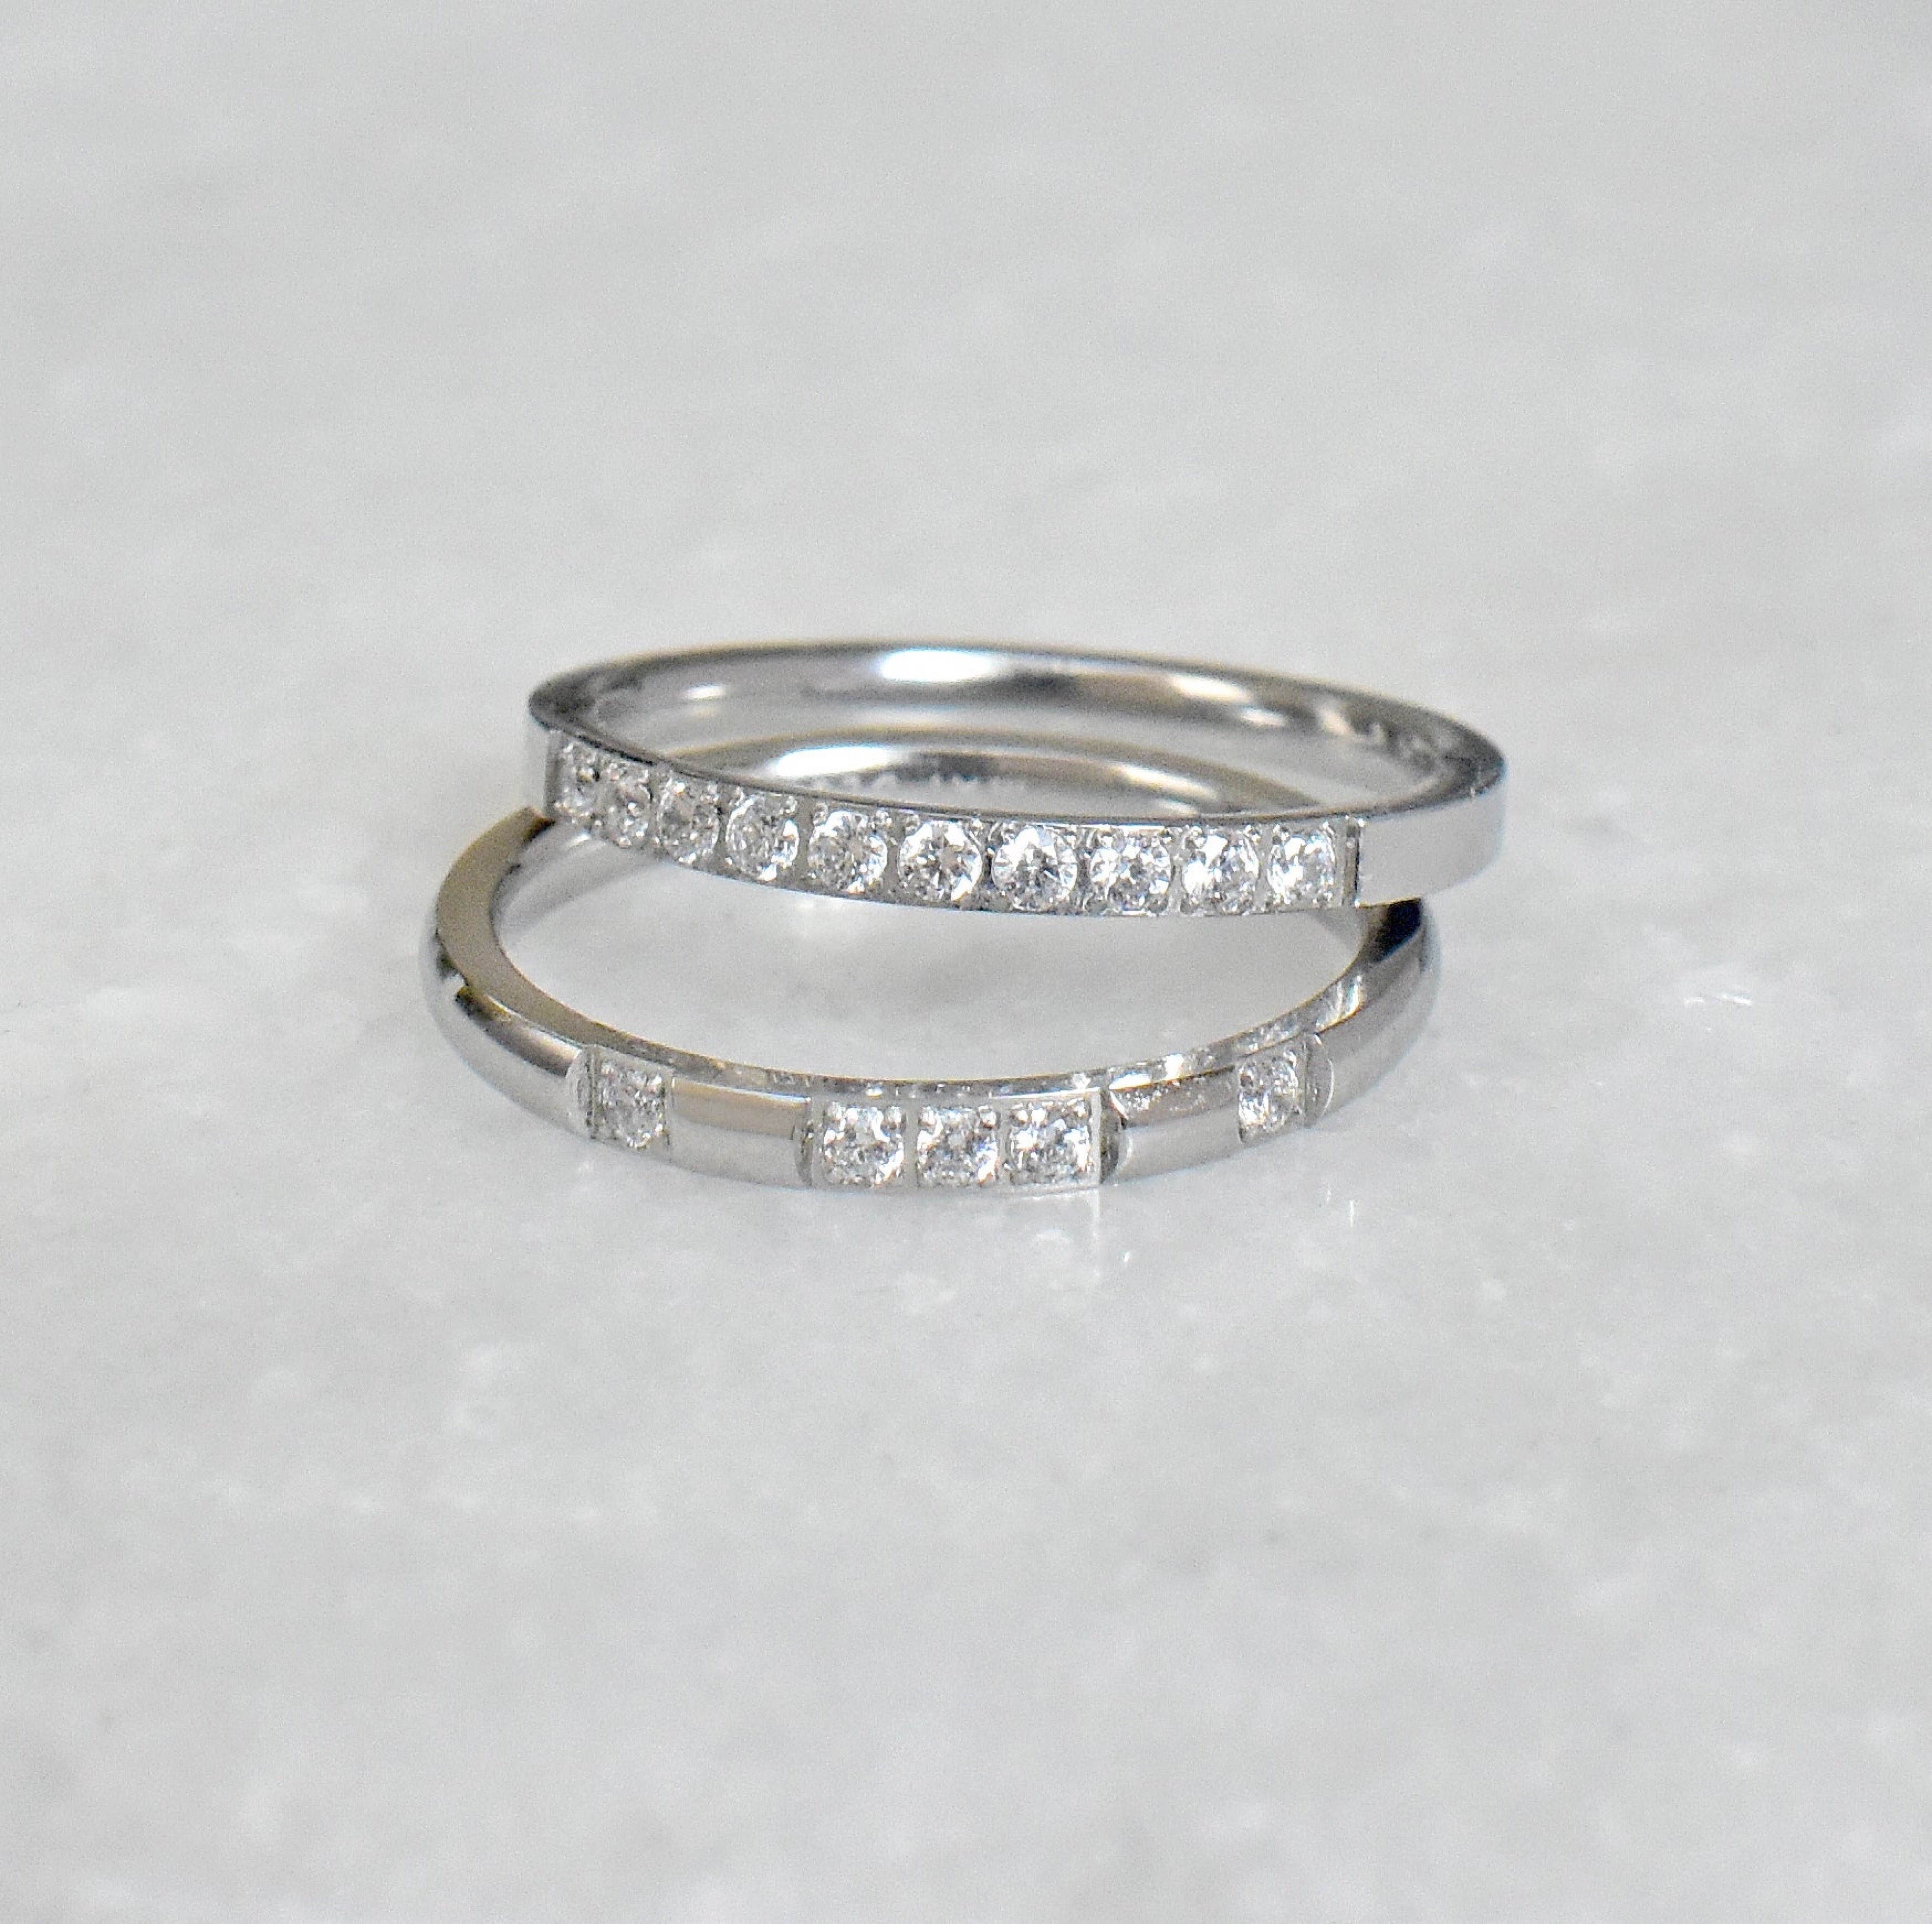 Stella silver half eternity ring band pair with veda ring band.  Silver waterproof jewelry